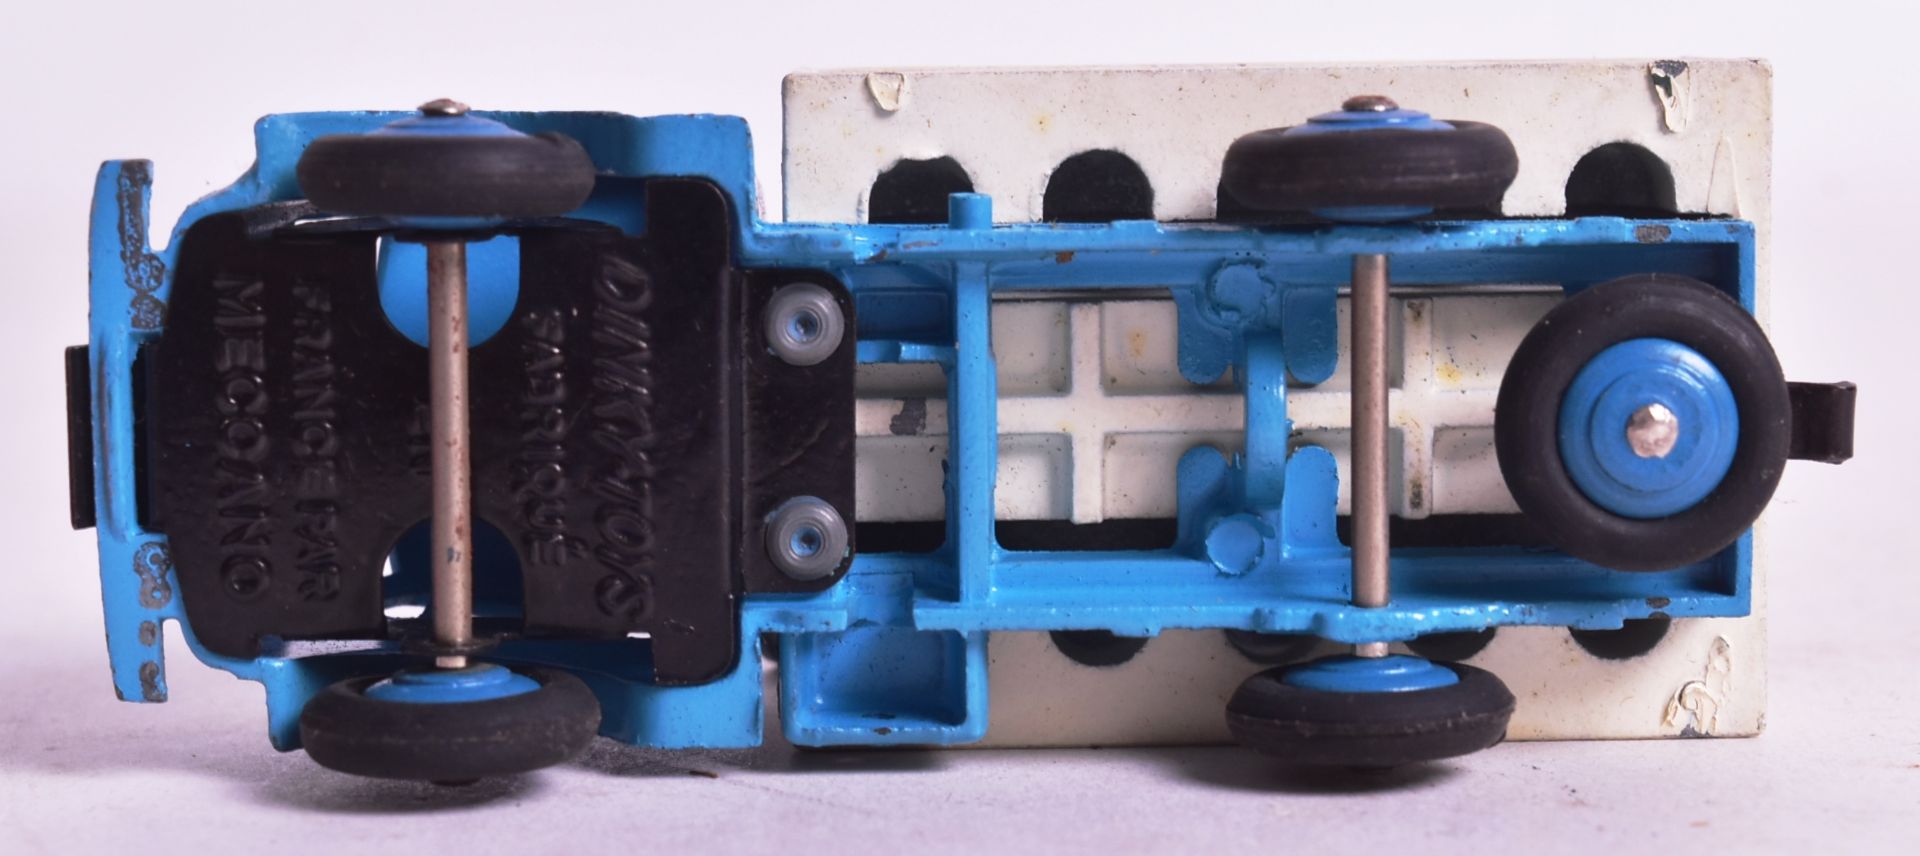 DIECAST - FRENCH DINKY TOYS - NESTLE DAIRY TRUCK - Image 6 of 7